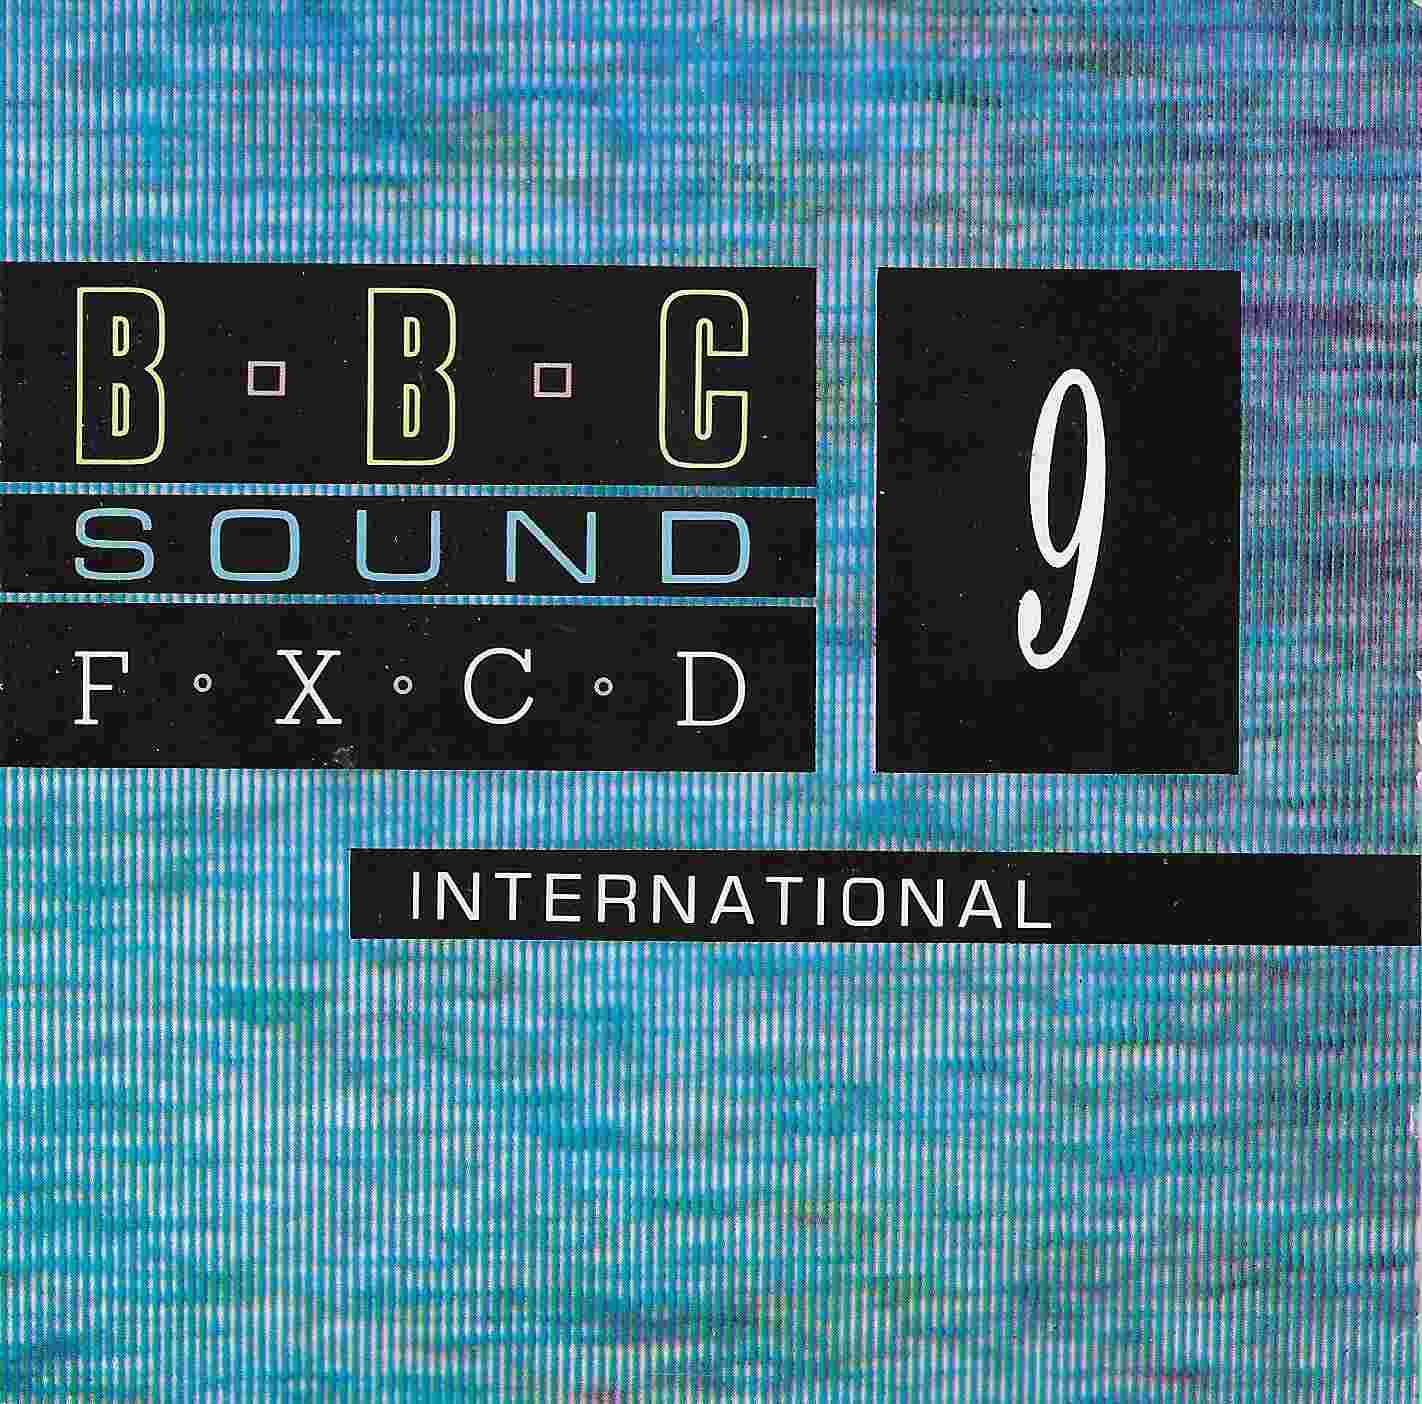 Picture of BBCCD SFX009 International by artist Various from the BBC cds - Records and Tapes library